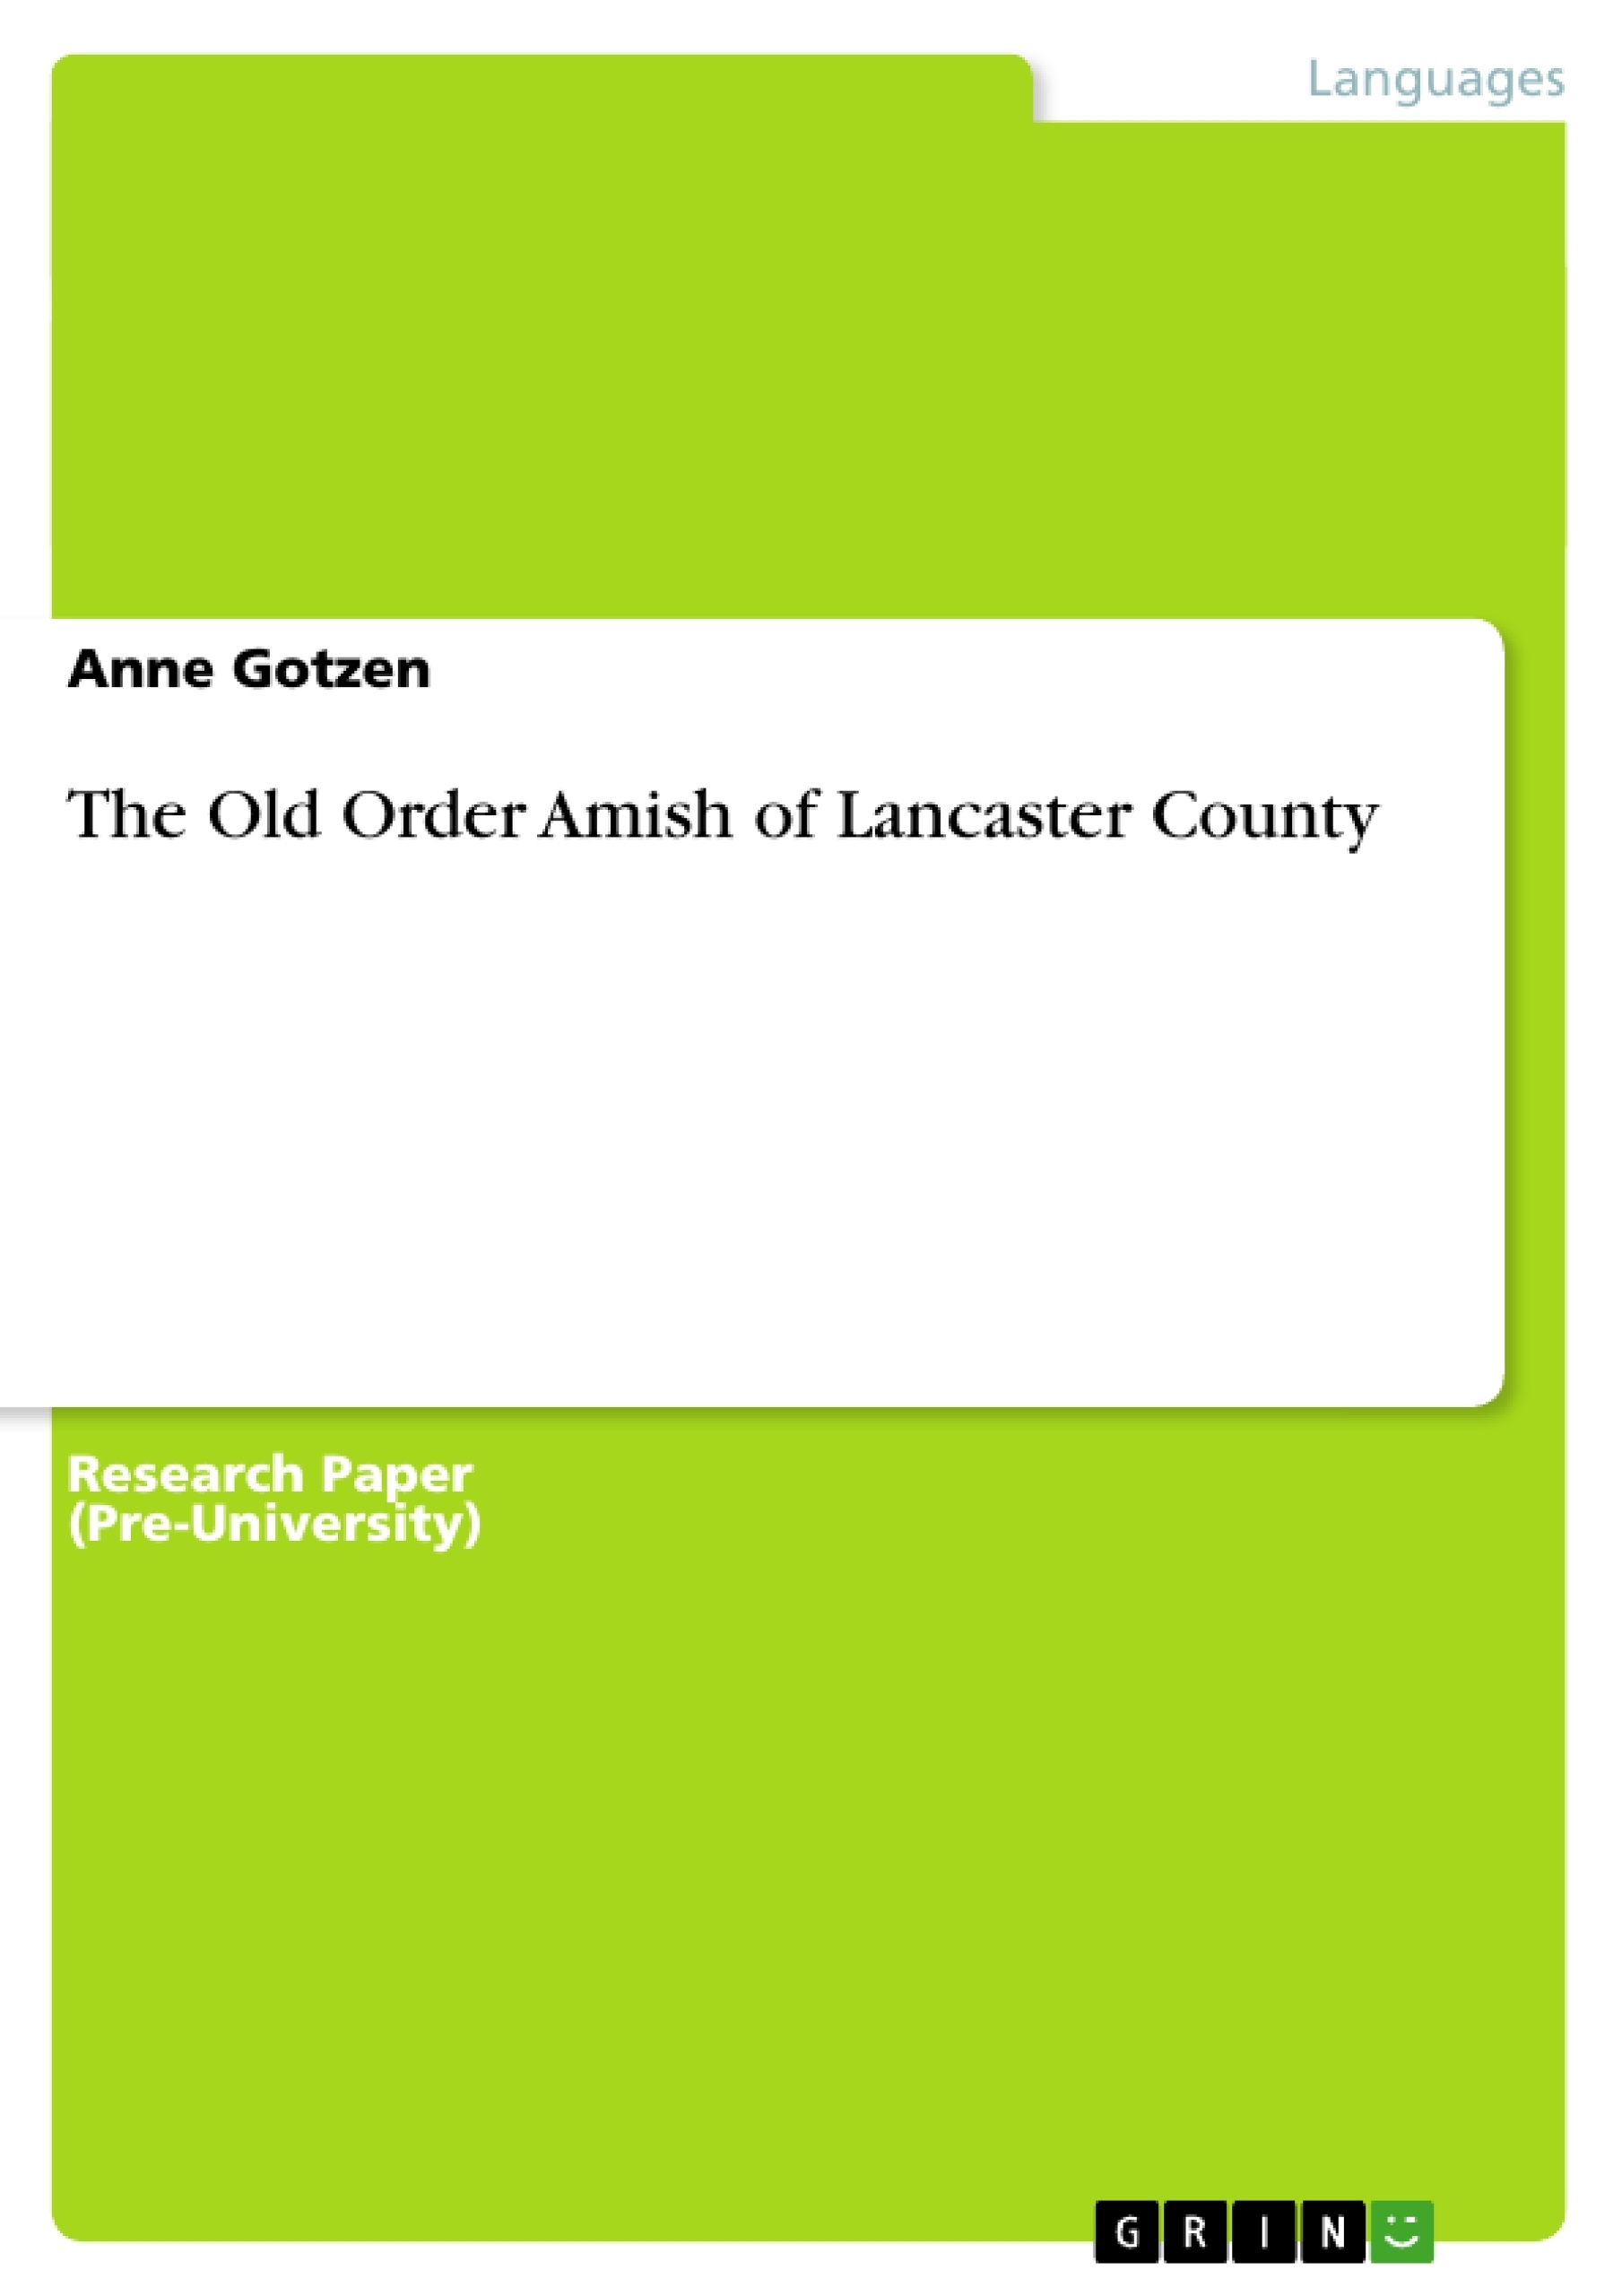 Title: The Old Order Amish of Lancaster County